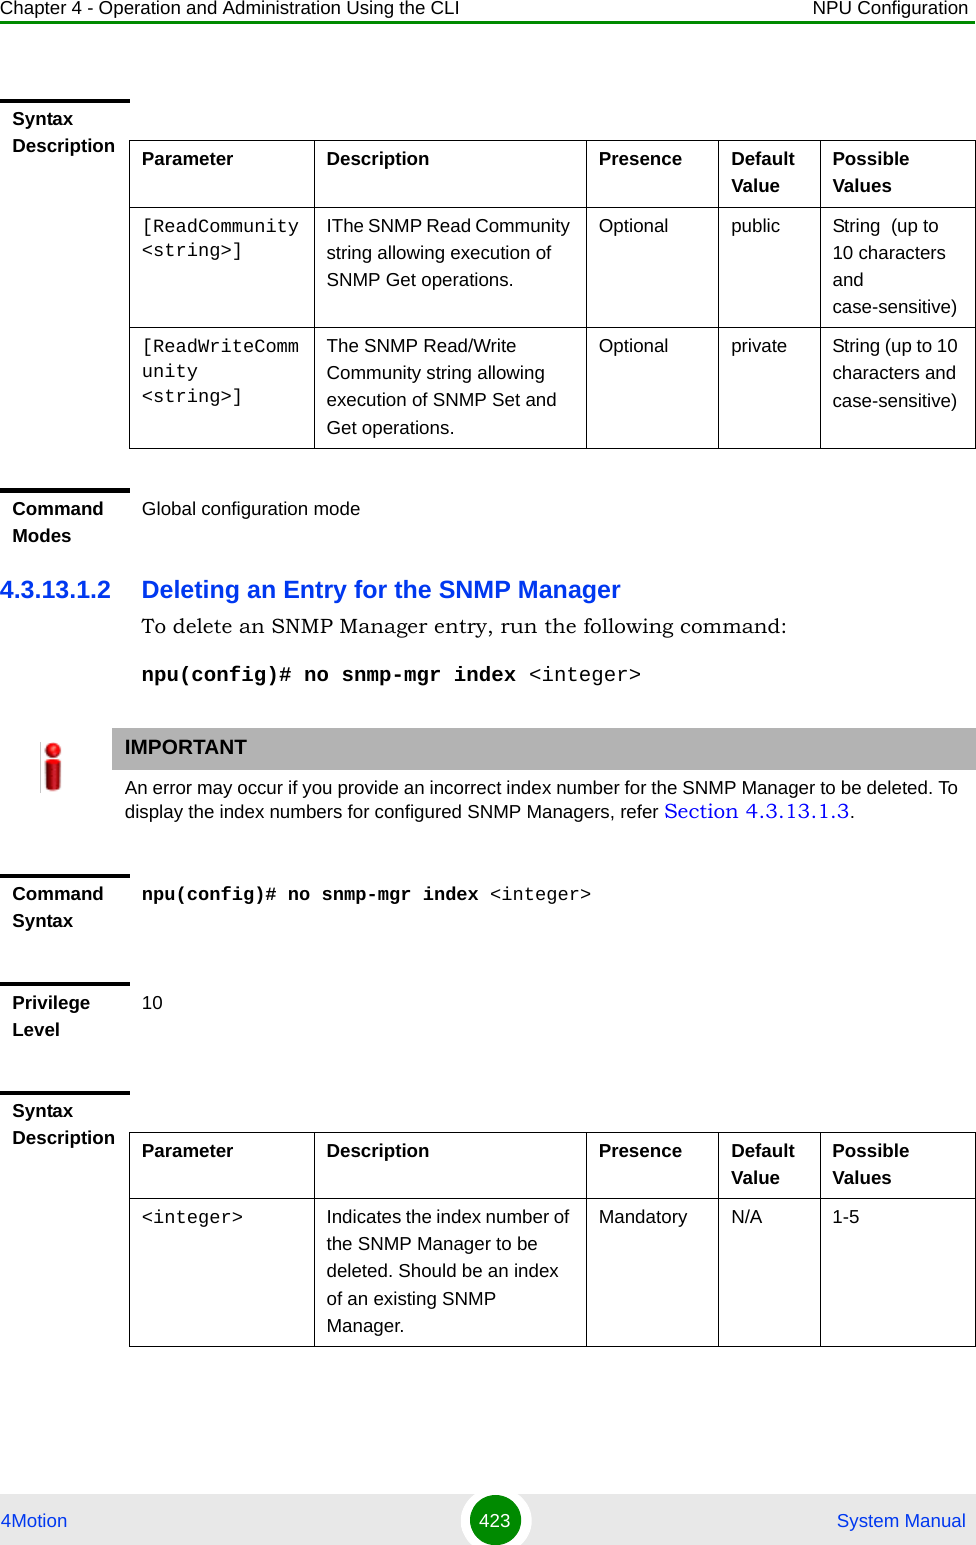 Chapter 4 - Operation and Administration Using the CLI NPU Configuration4Motion 423  System Manual4.3.13.1.2 Deleting an Entry for the SNMP ManagerTo delete an SNMP Manager entry, run the following command:npu(config)# no snmp-mgr index &lt;integer&gt;Syntax Description Parameter Description Presence Default ValuePossible Values[ReadCommunity &lt;string&gt;]IThe SNMP Read Community string allowing execution of SNMP Get operations.Optional public String  (up to 10 characters and case-sensitive)[ReadWriteCommunity &lt;string&gt;]The SNMP Read/Write Community string allowing execution of SNMP Set and Get operations.Optional private String (up to 10 characters and case-sensitive)Command ModesGlobal configuration modeIMPORTANTAn error may occur if you provide an incorrect index number for the SNMP Manager to be deleted. To display the index numbers for configured SNMP Managers, refer Section 4.3.13.1.3.Command Syntaxnpu(config)# no snmp-mgr index &lt;integer&gt;Privilege Level10Syntax Description Parameter Description Presence Default ValuePossible Values&lt;integer&gt; Indicates the index number of the SNMP Manager to be deleted. Should be an index of an existing SNMP Manager.Mandatory N/A 1-5